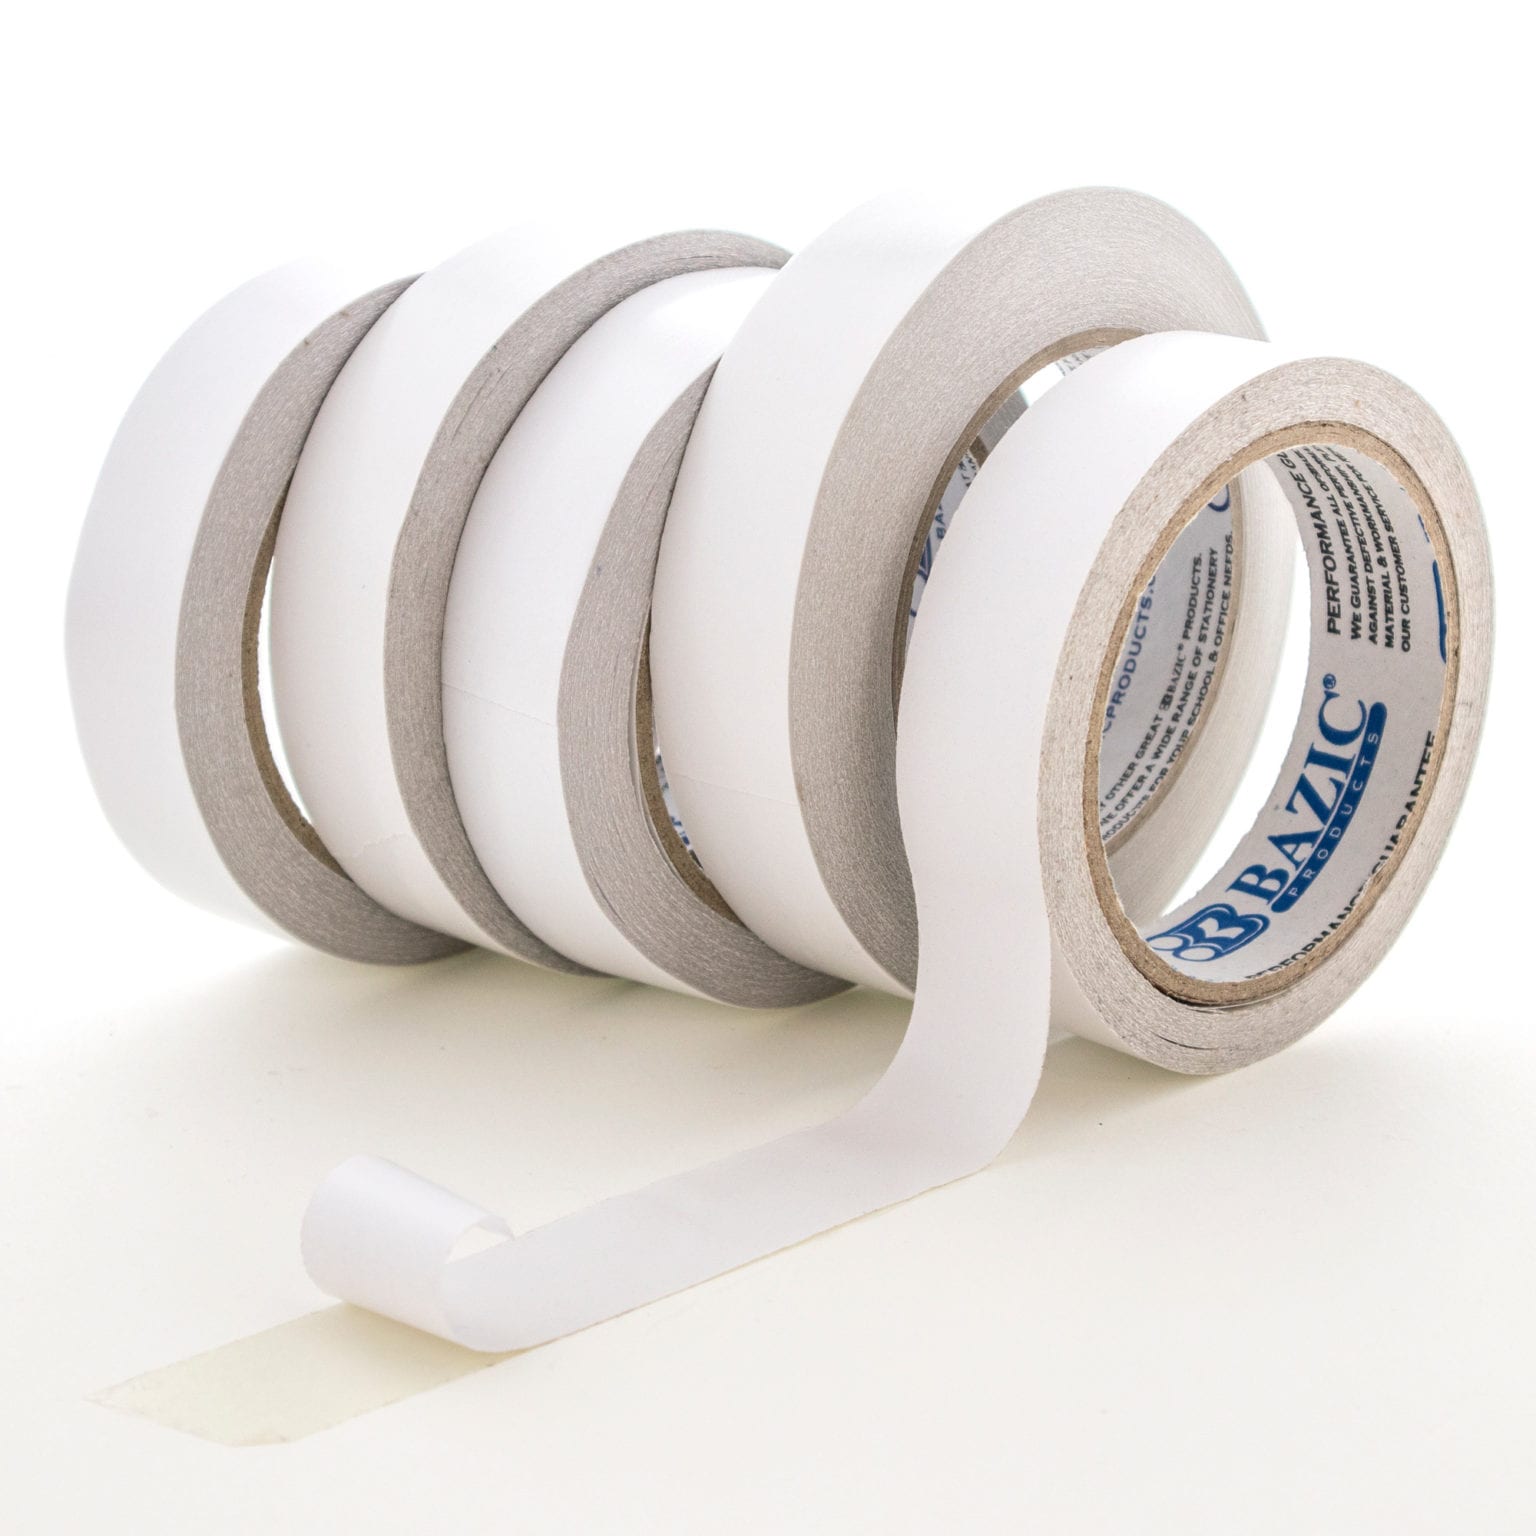 thermal tape double sideed home depot